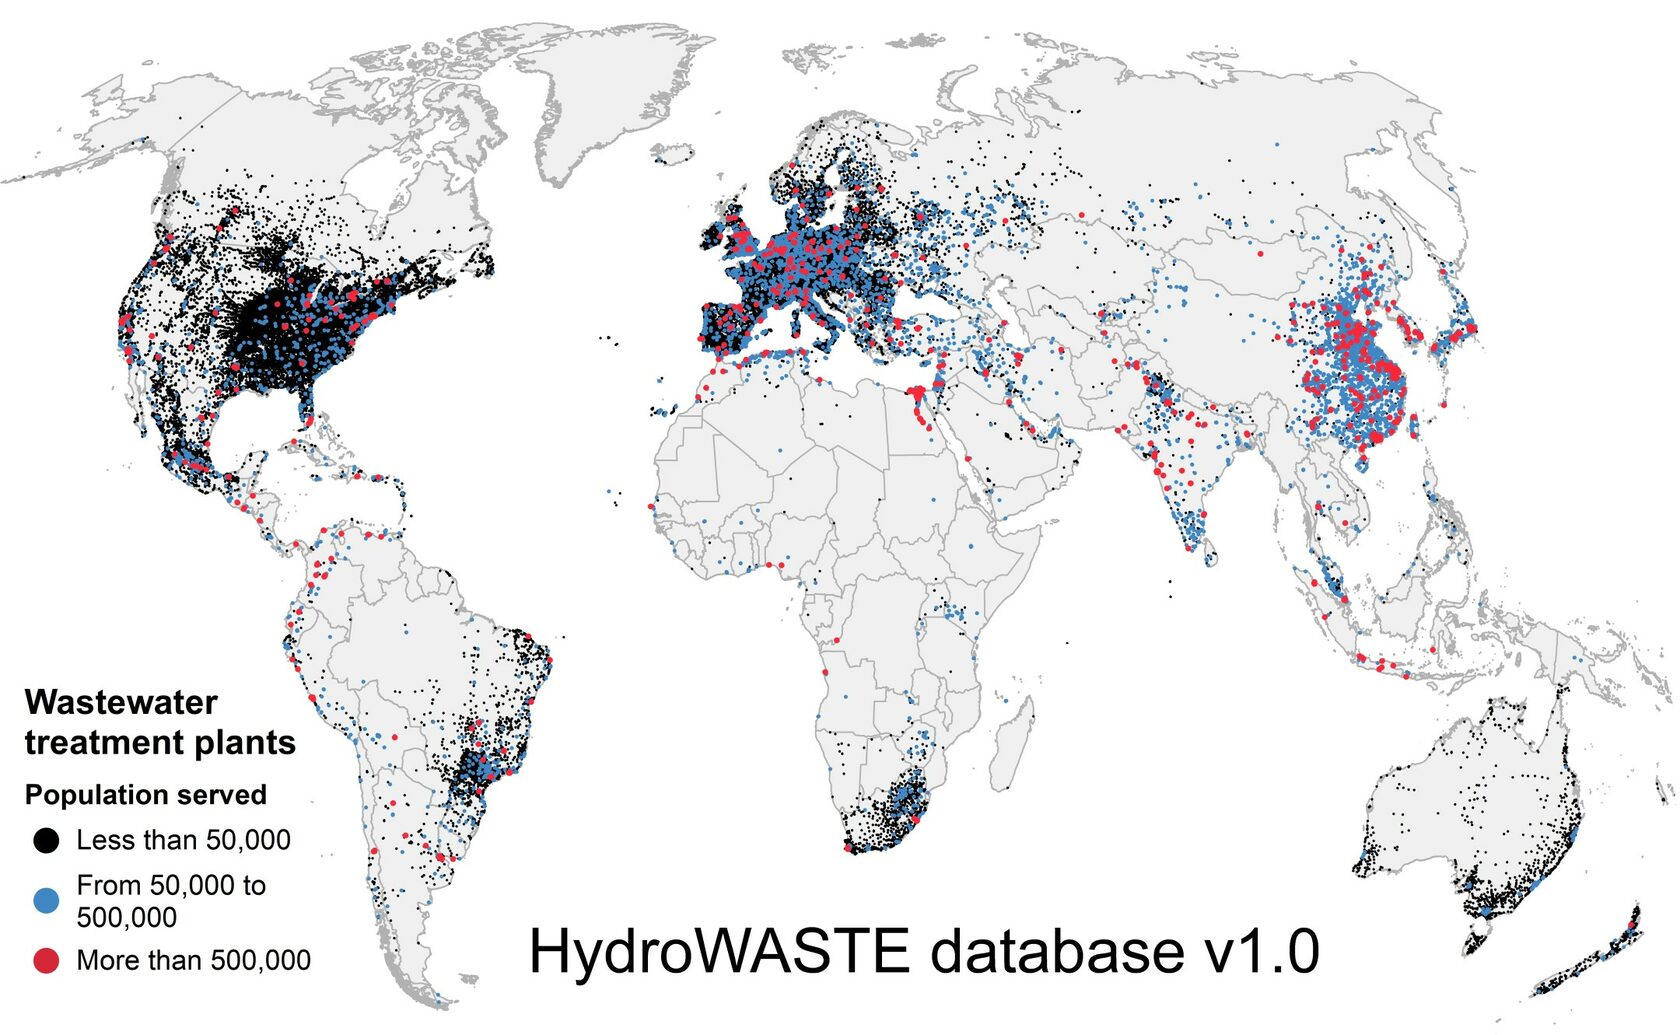 Global map of wastewater treatment plant distribution, colored by population served. Points in red serve over 500,000 people, points in blue serve between 50,000 and 500,000 people, and points in black serve fewer than 50,000 people.